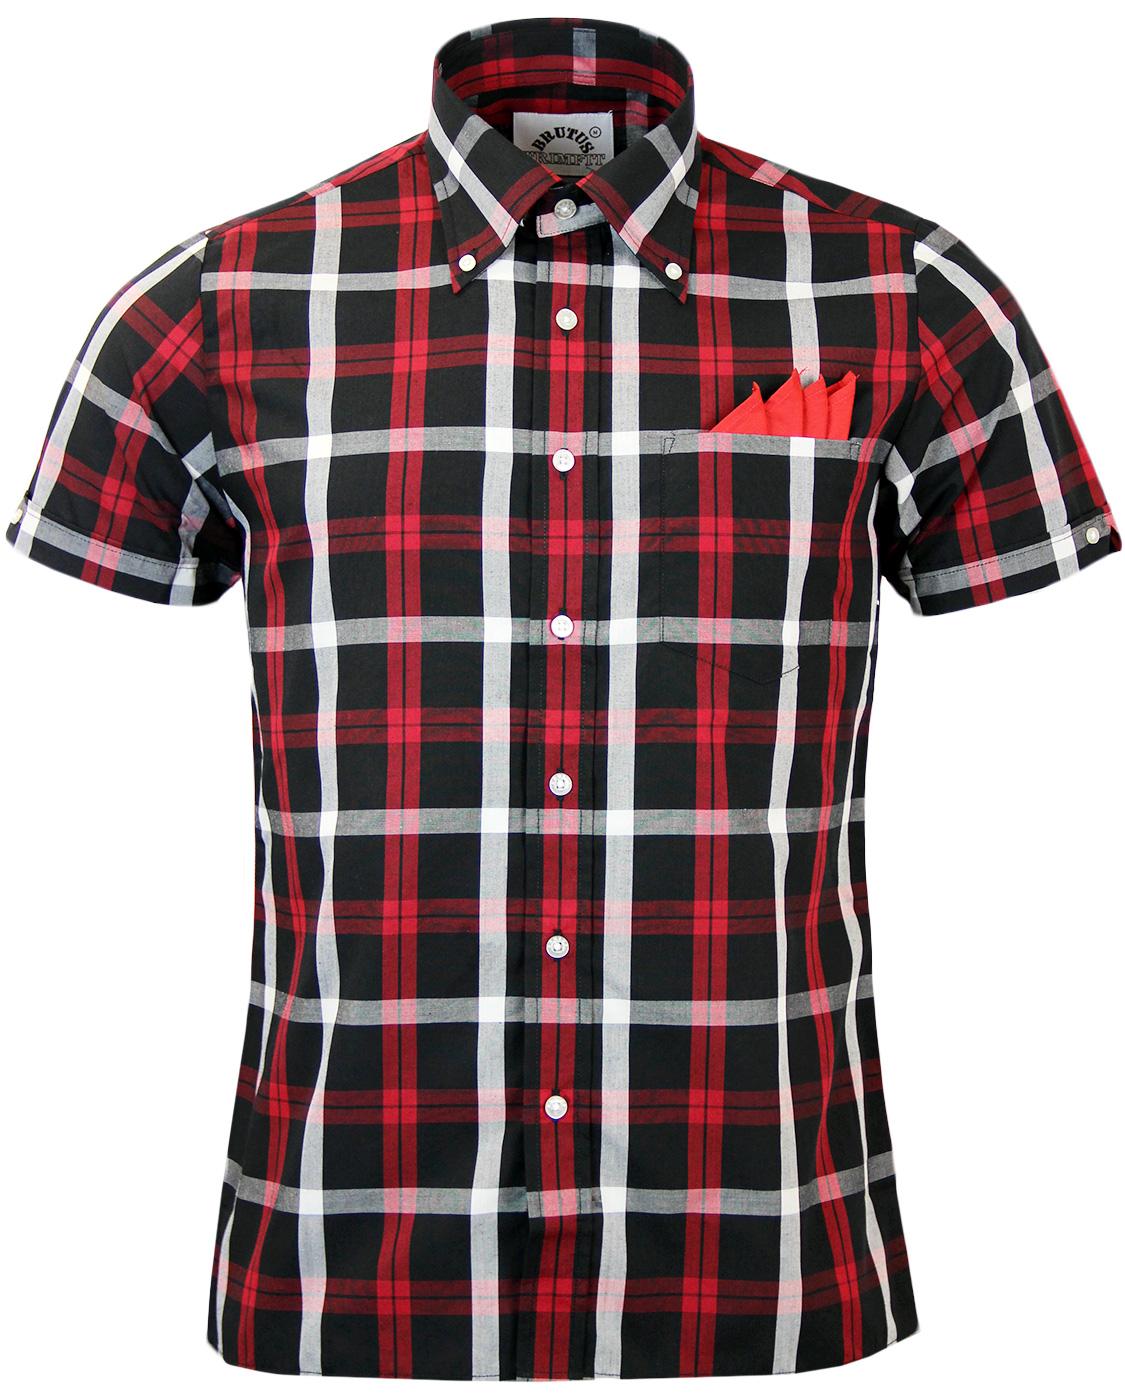 BRUTUS TRIMFIT Retro 60s Mod Button Down Check Shirt in Black/Red